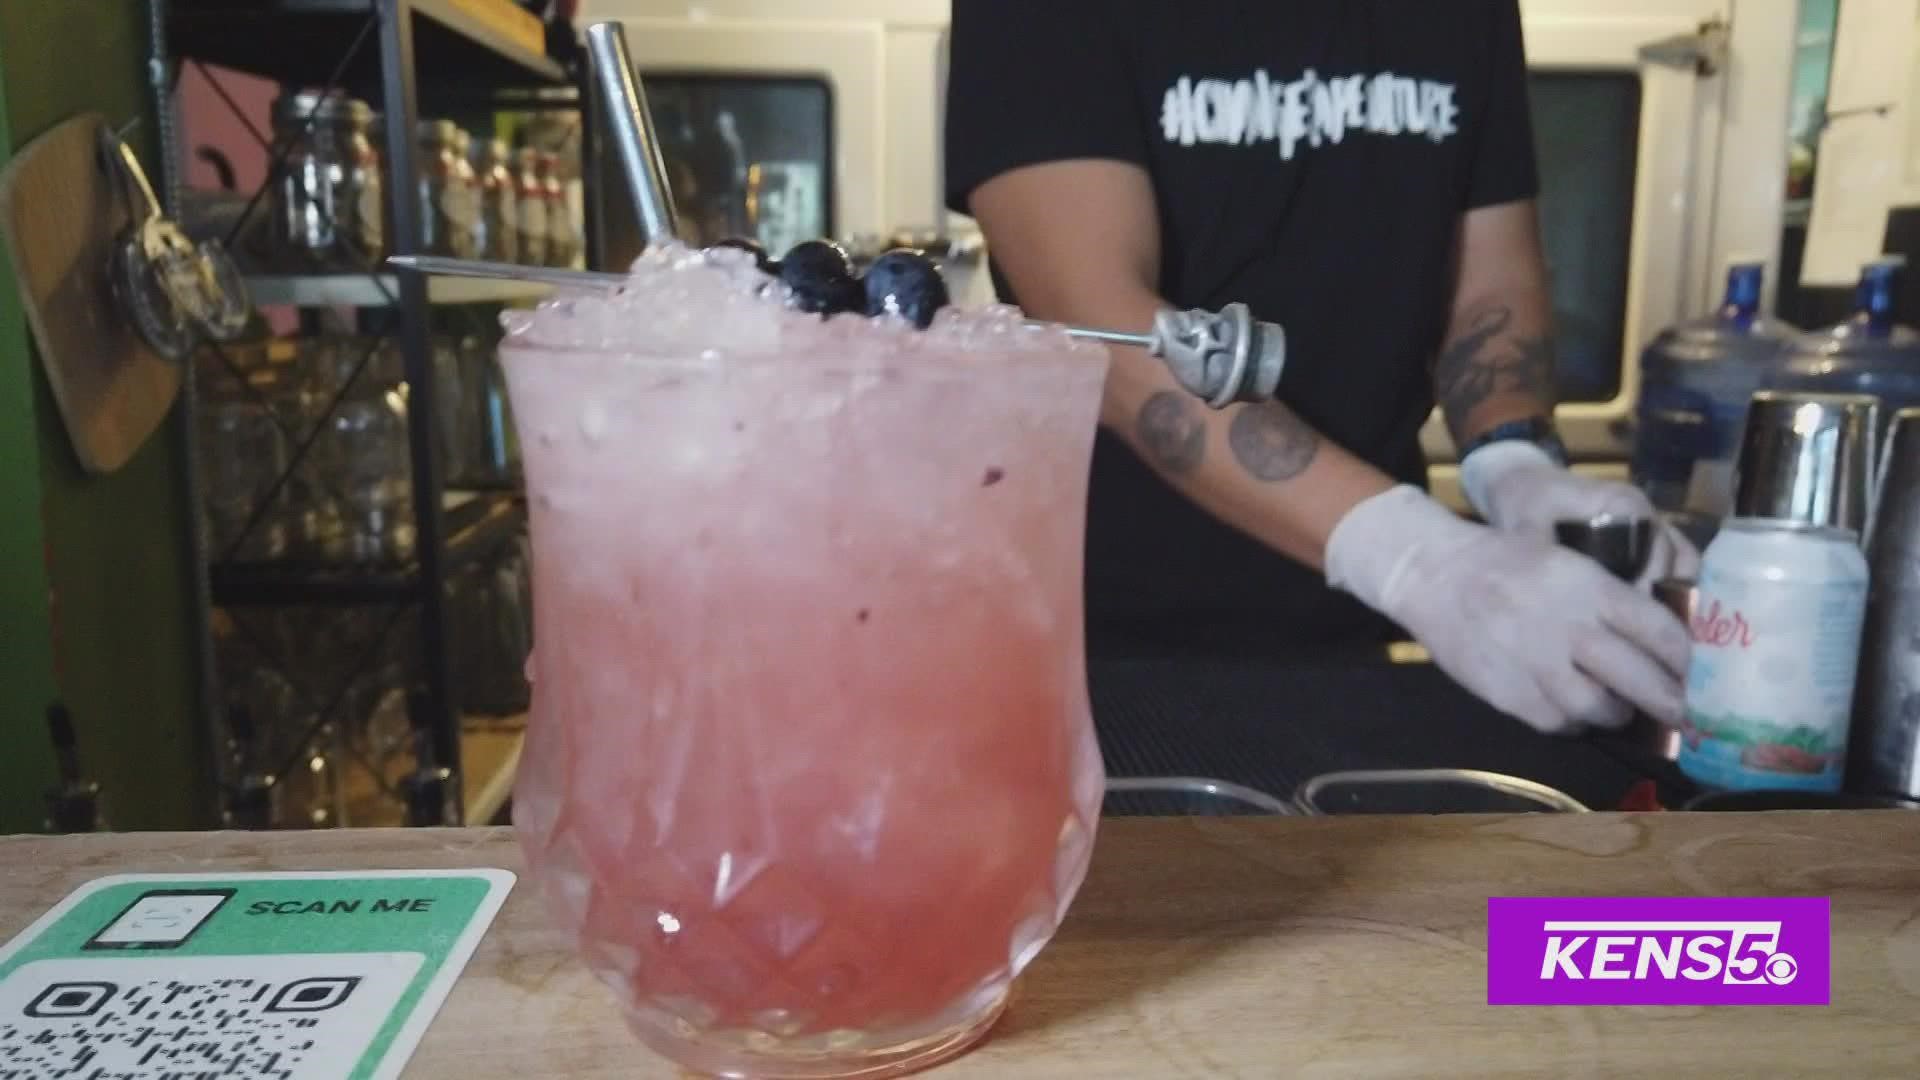 Rogelio Sanchez is repurposing his talents behind the bar to pour into is new purpose found in giving hope to recovering addicts.